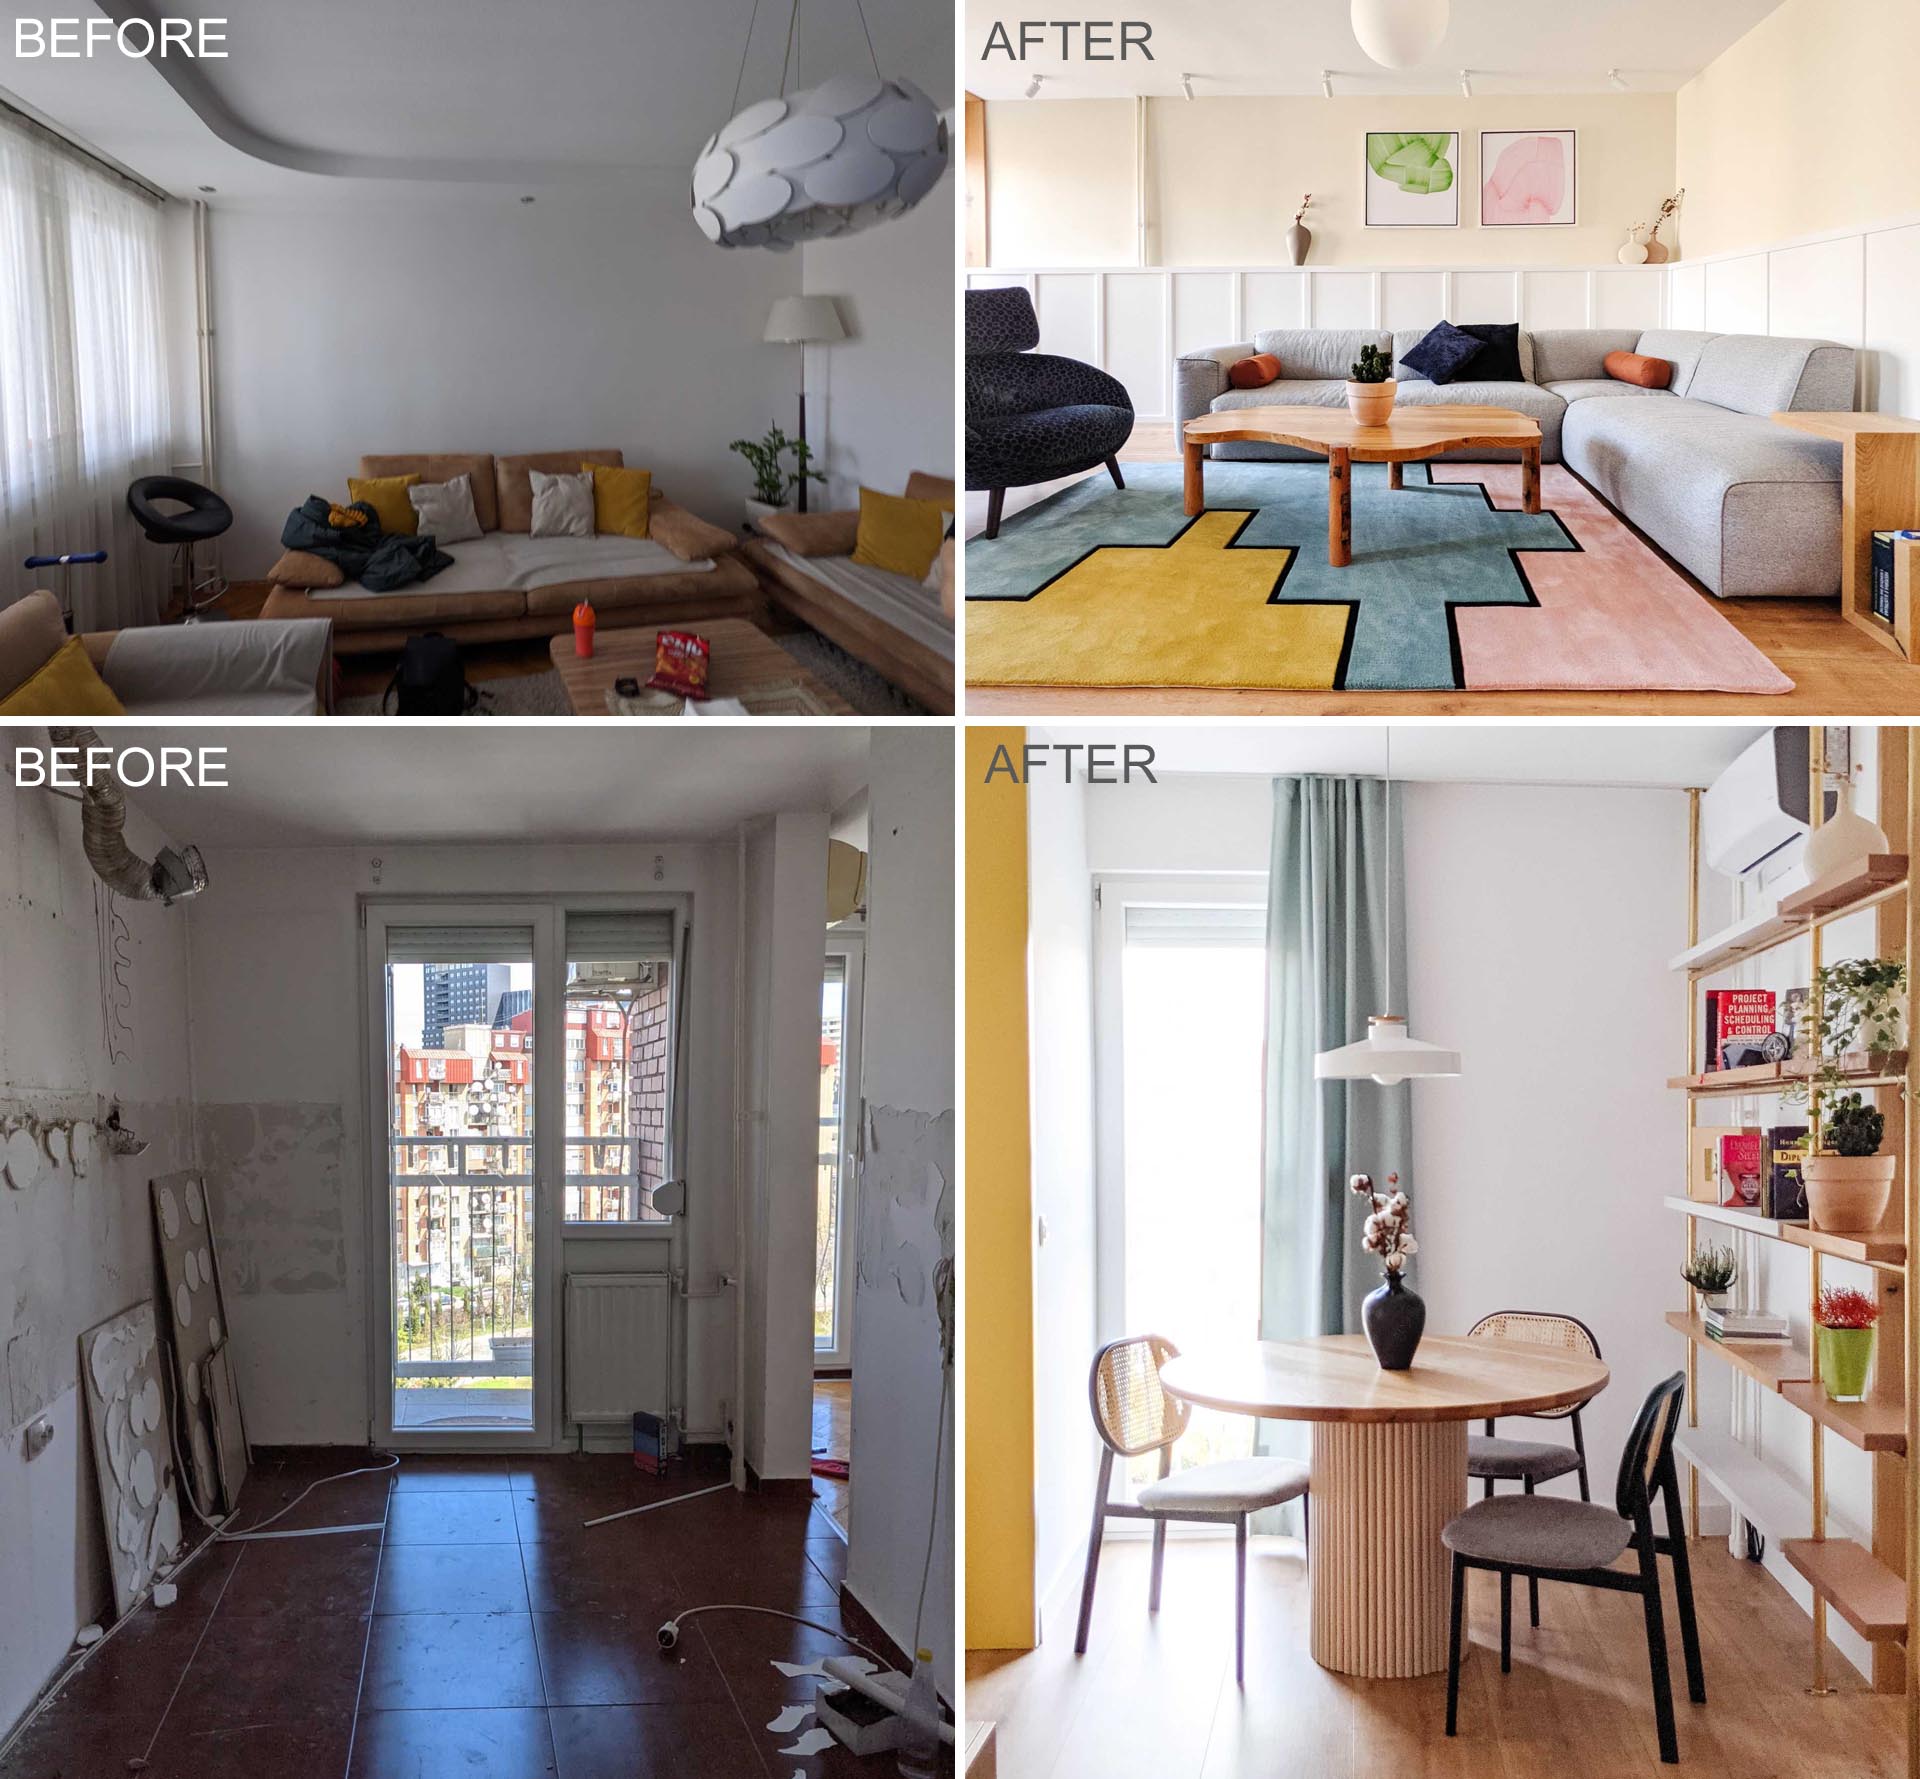 BEFORE and AFTER - A dated 1960's apartment was completely gutted before being transformed into an apartment full of color.